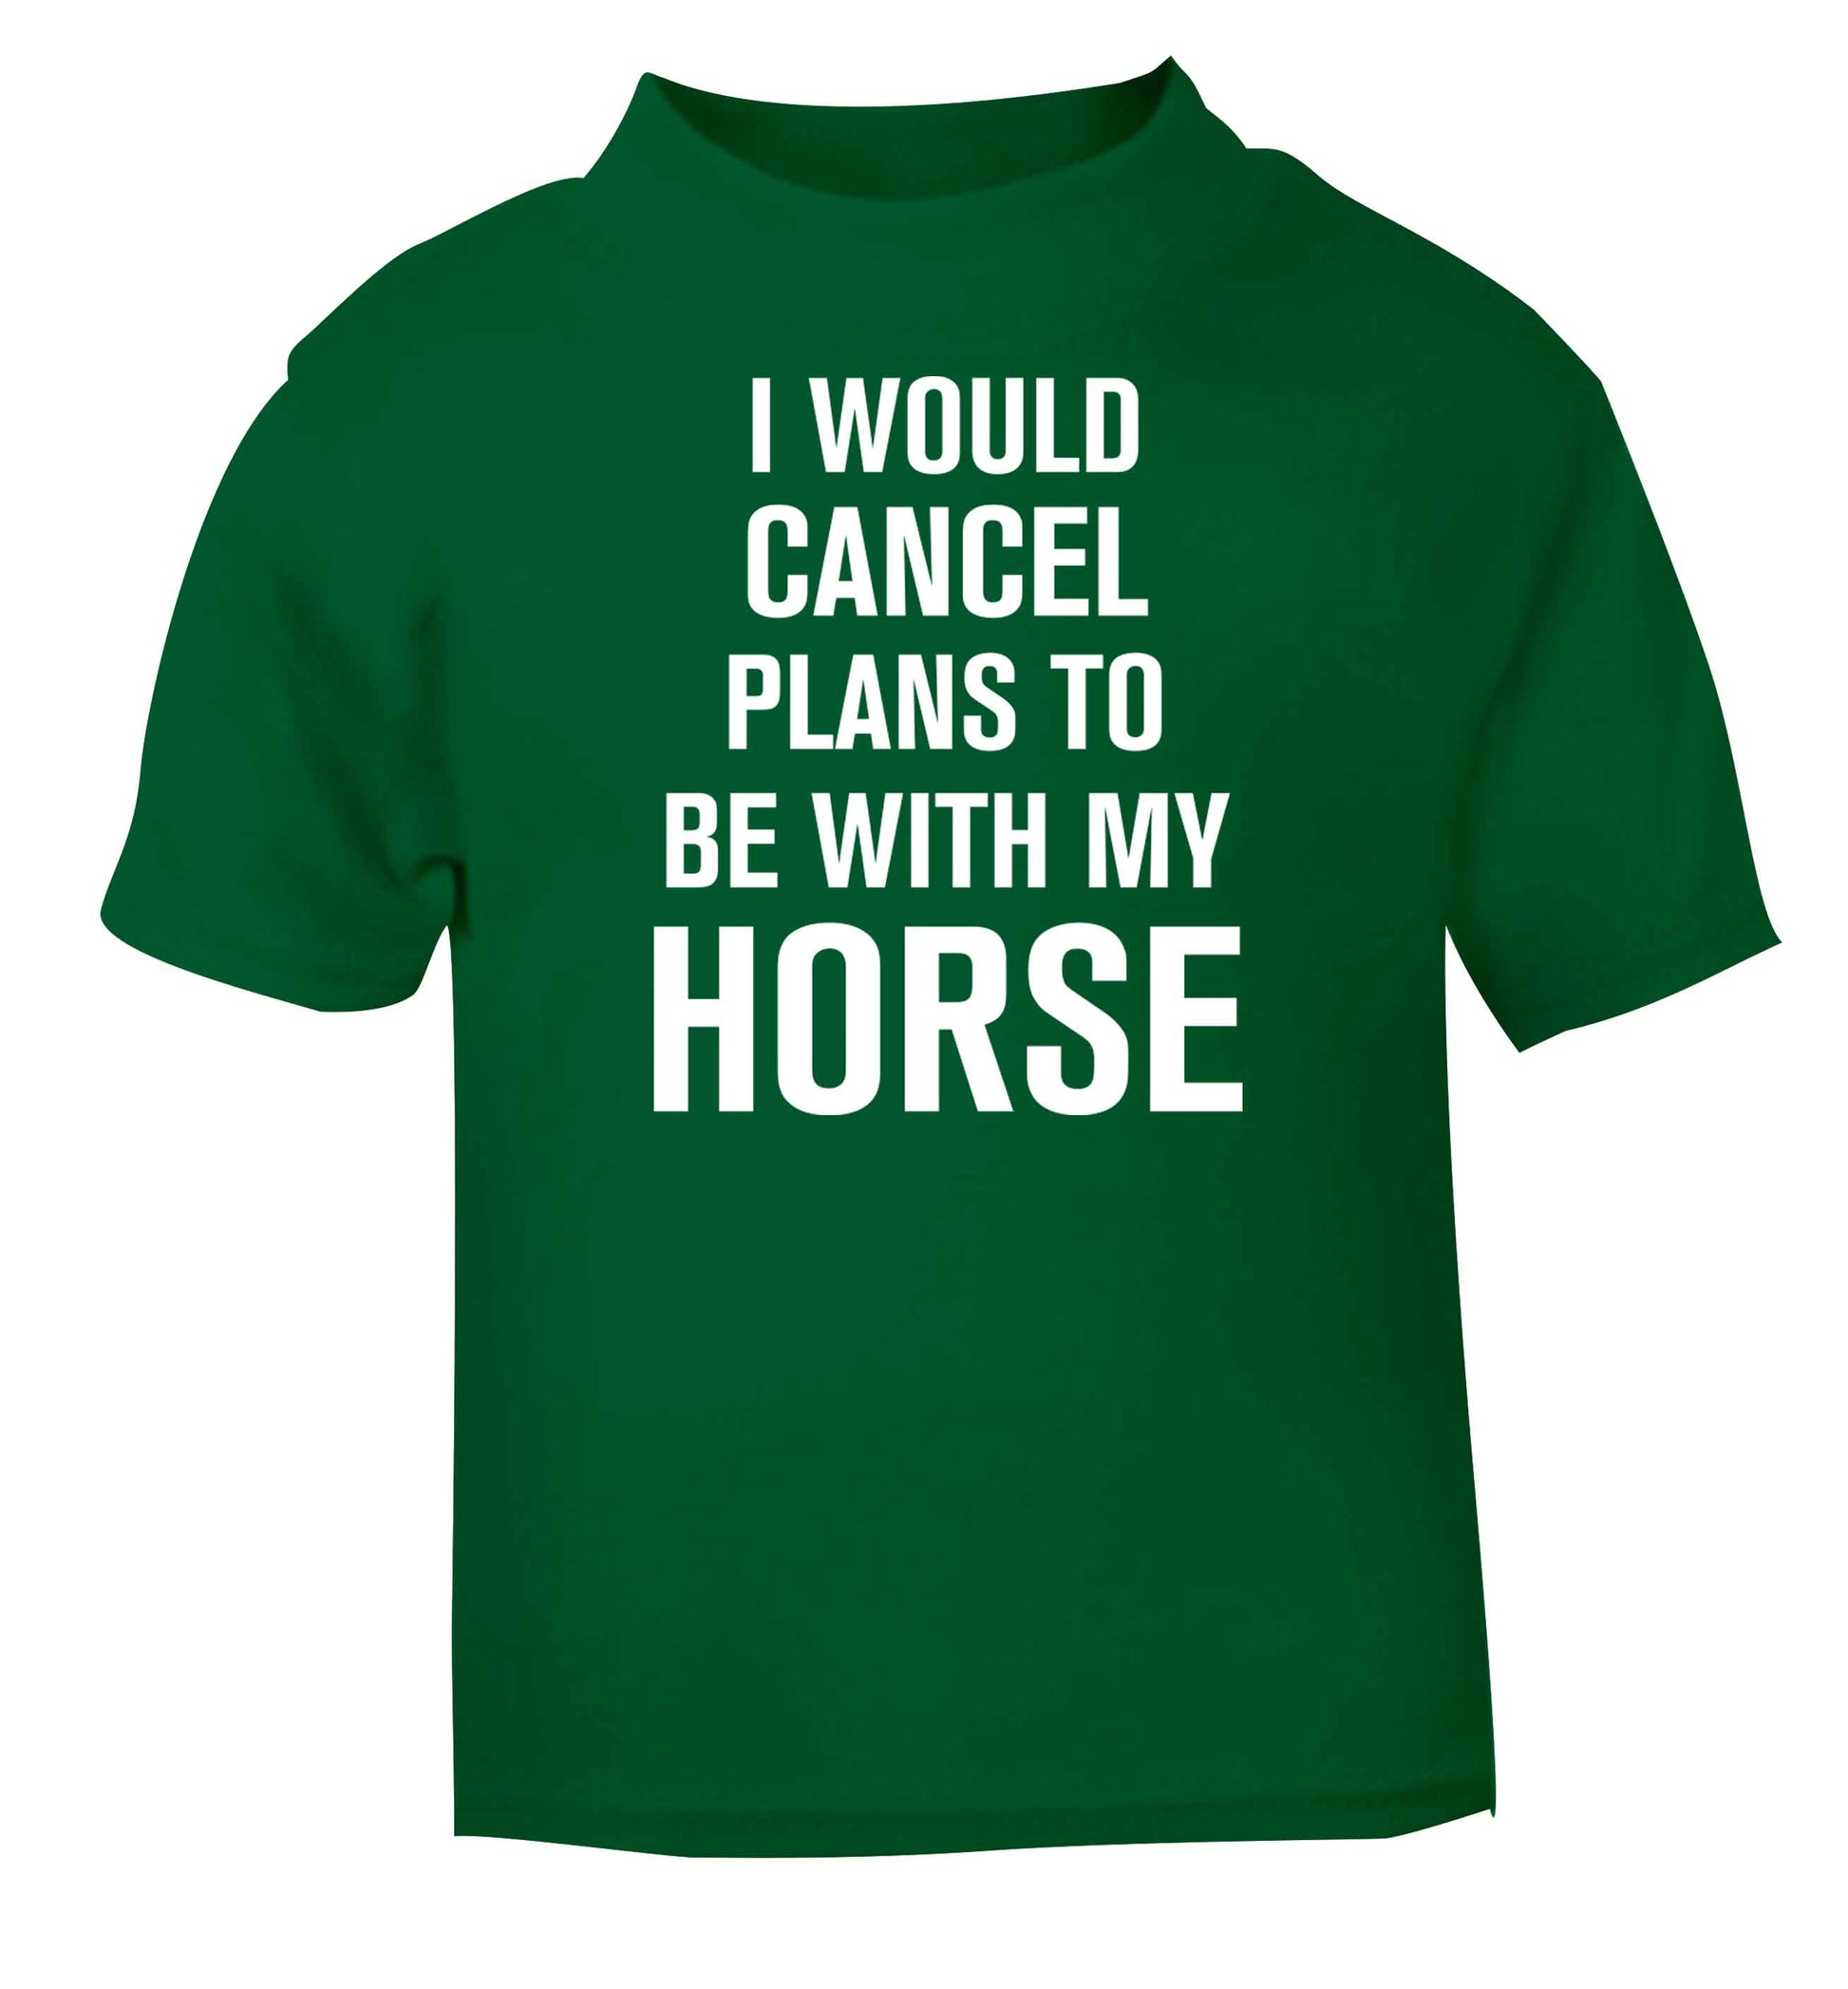 I will cancel plans to be with my horse green baby toddler Tshirt 2 Years